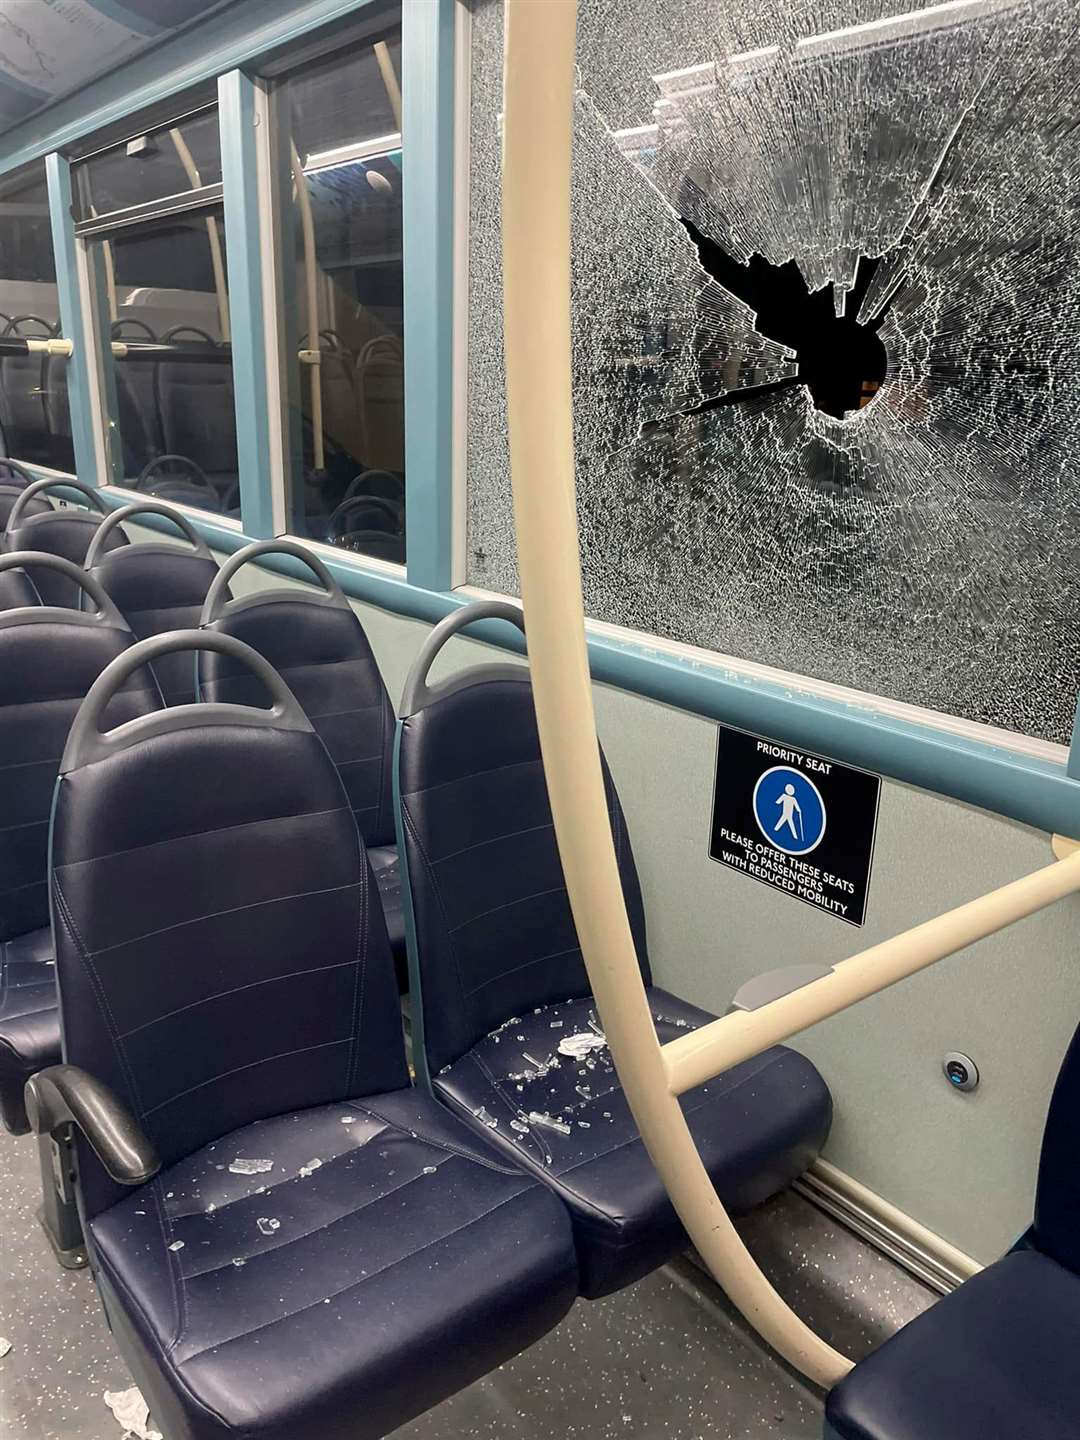 An Arriva bus window was smashed in Temple Hill, Dartford